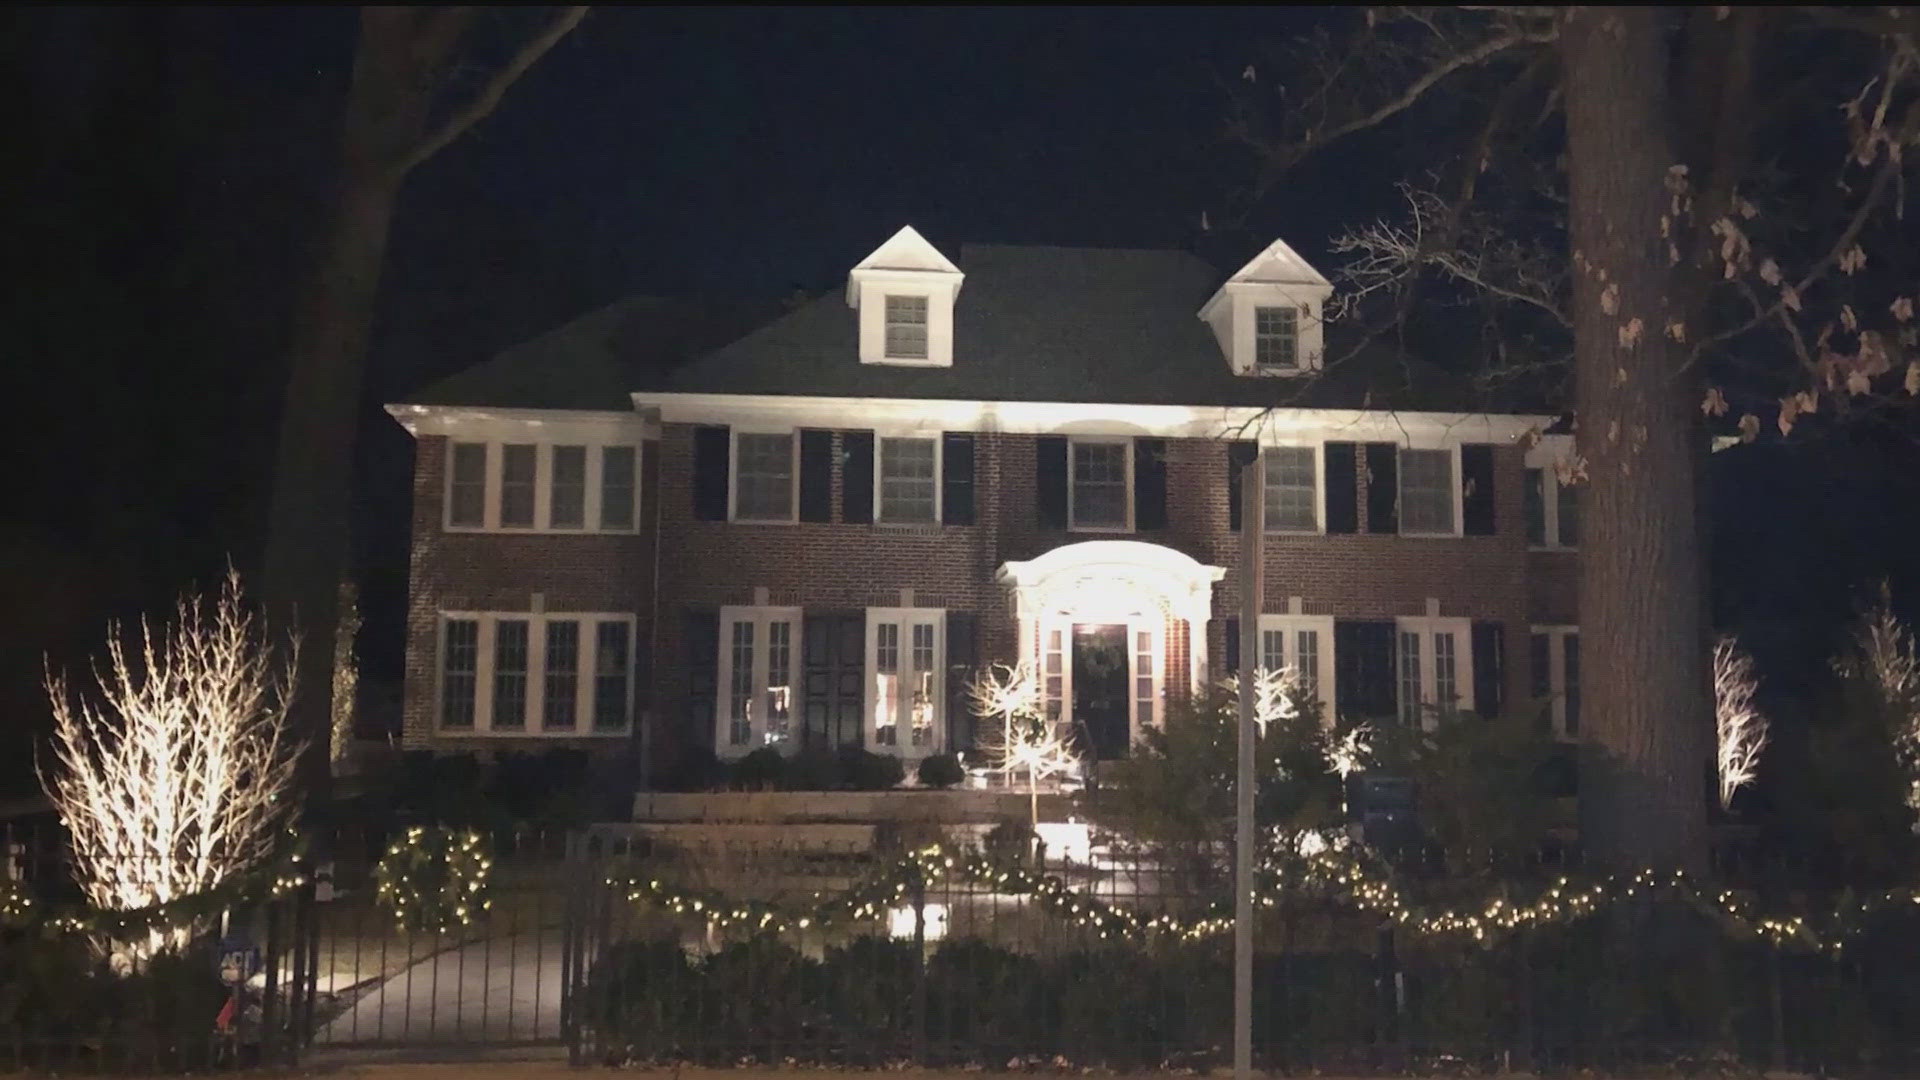 The suburban Chicago home used in the Christmas classic is up for sale.